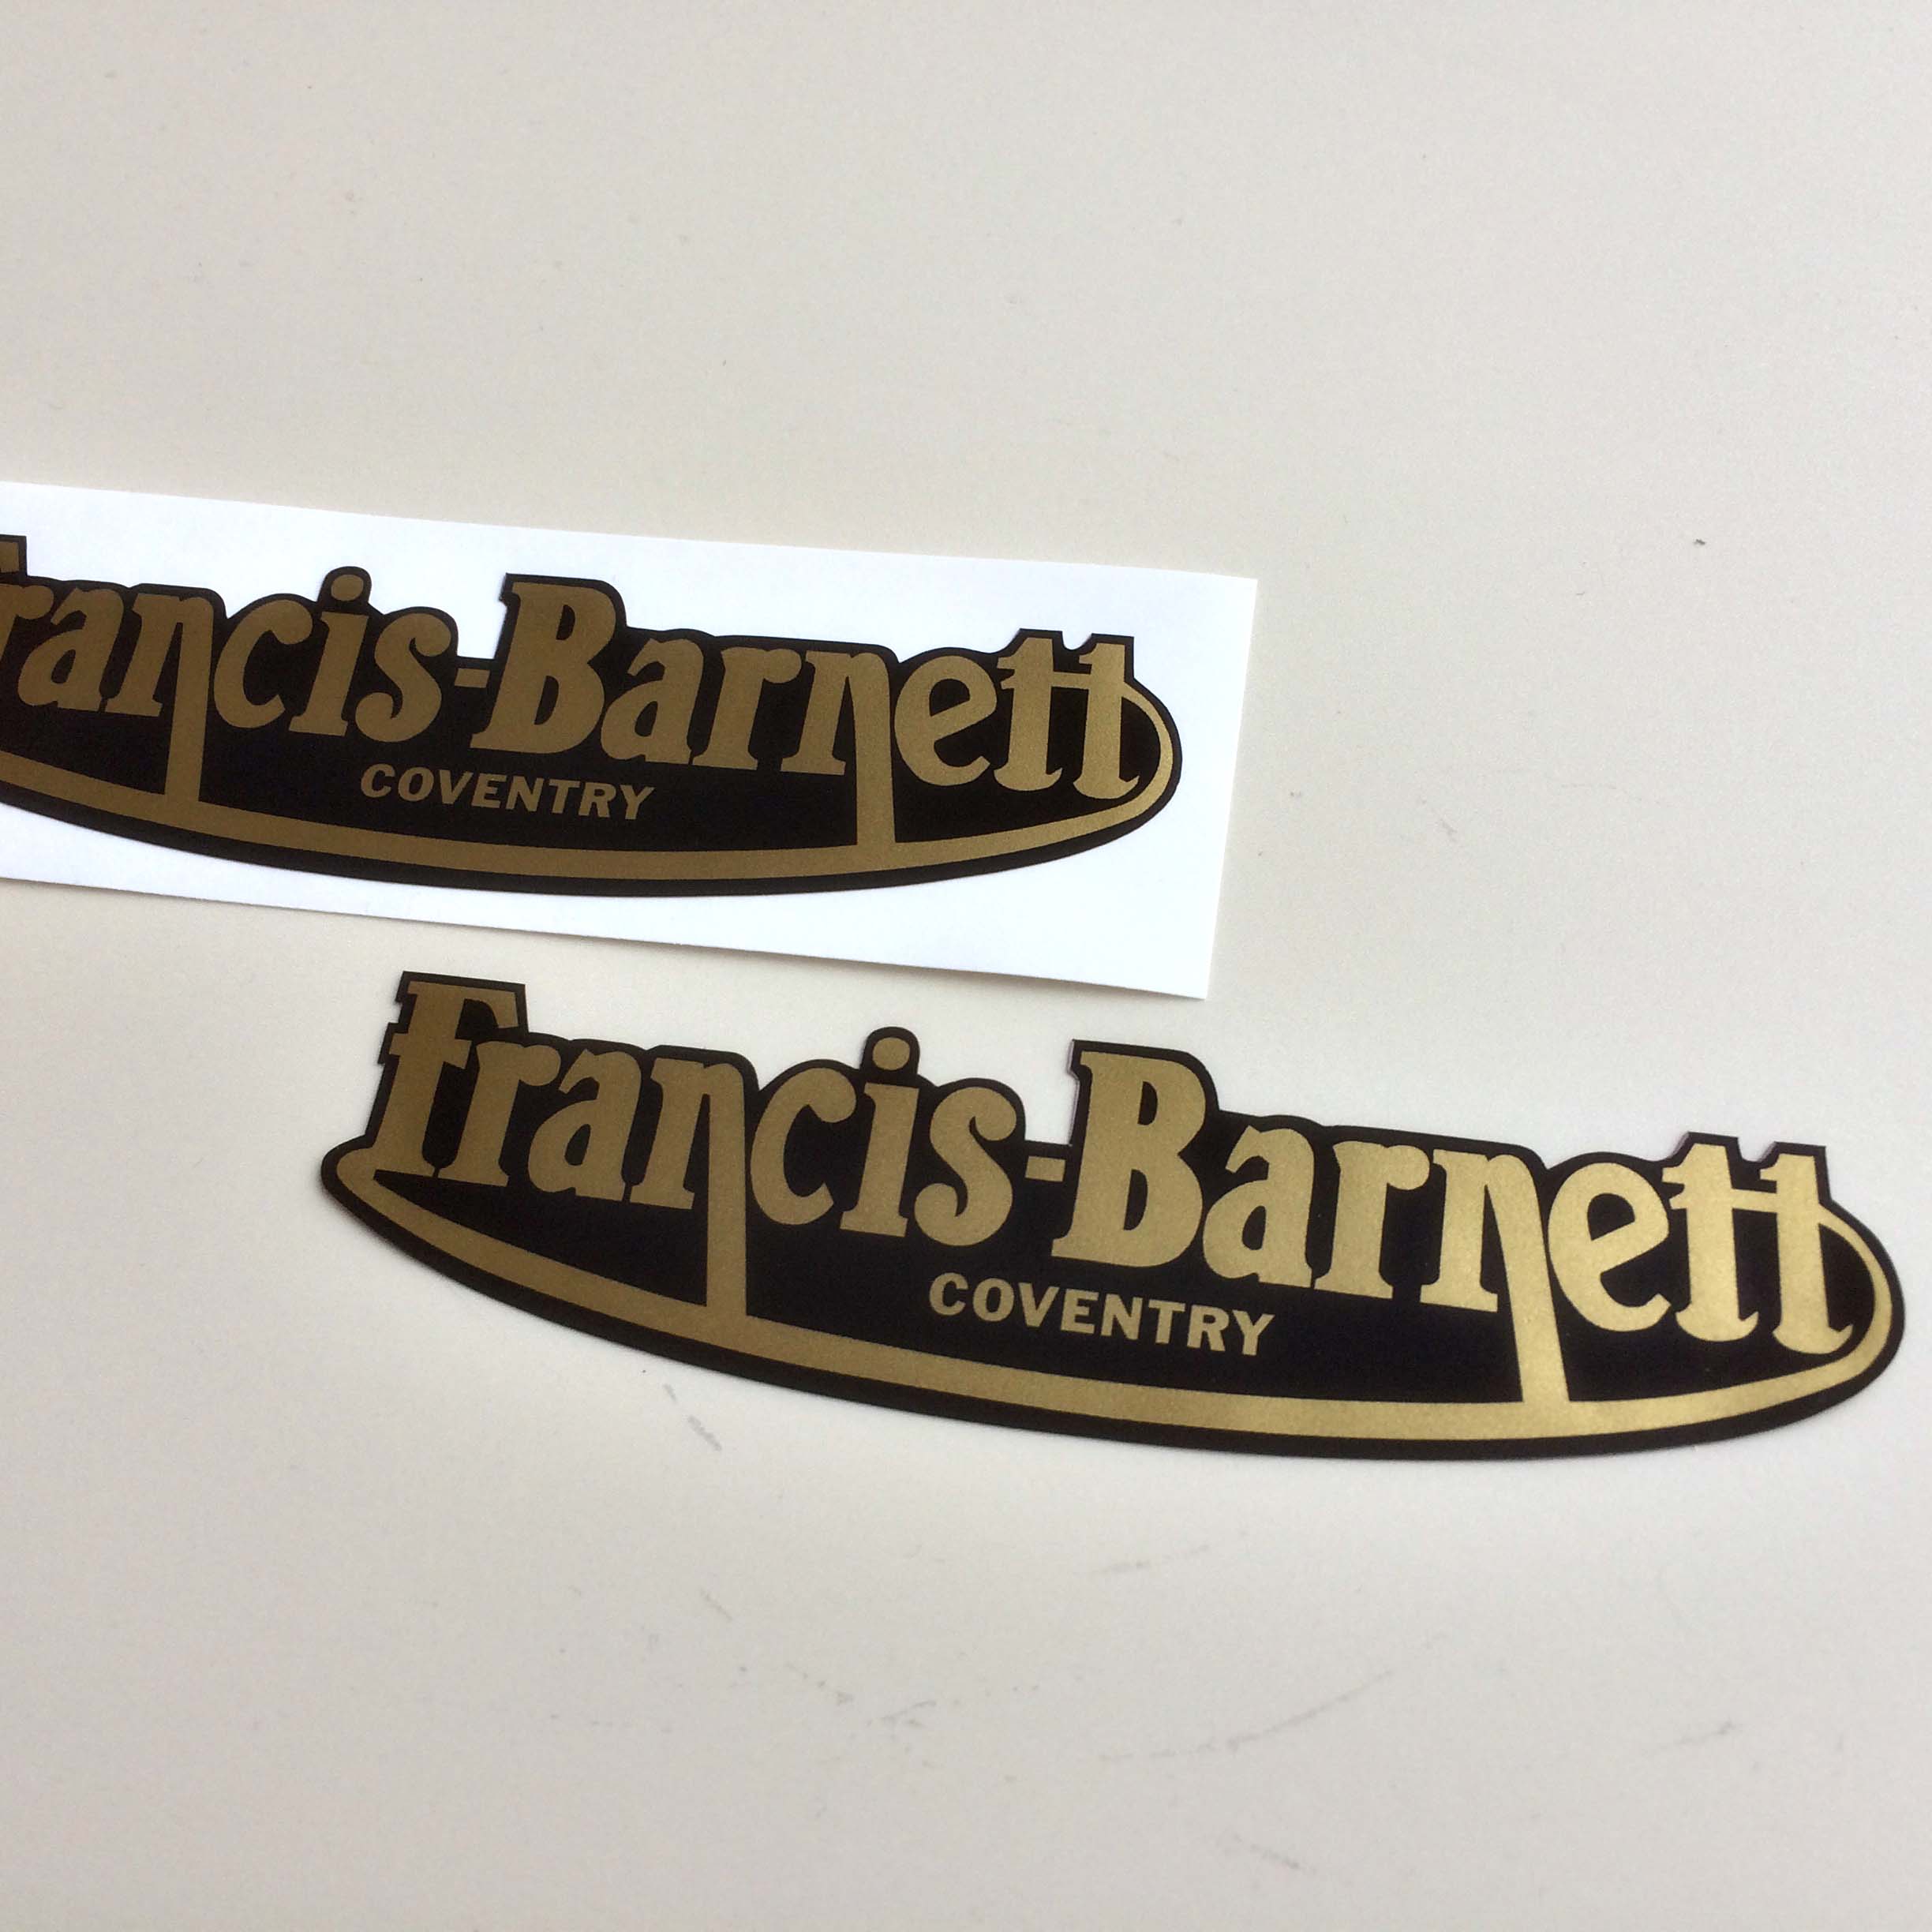 FRANCIS BARNETT LETTERING VINTAGE STICKERS. Francis-Barnett in lowercase lettering with Coventry in uppercase lettering below on a black background.